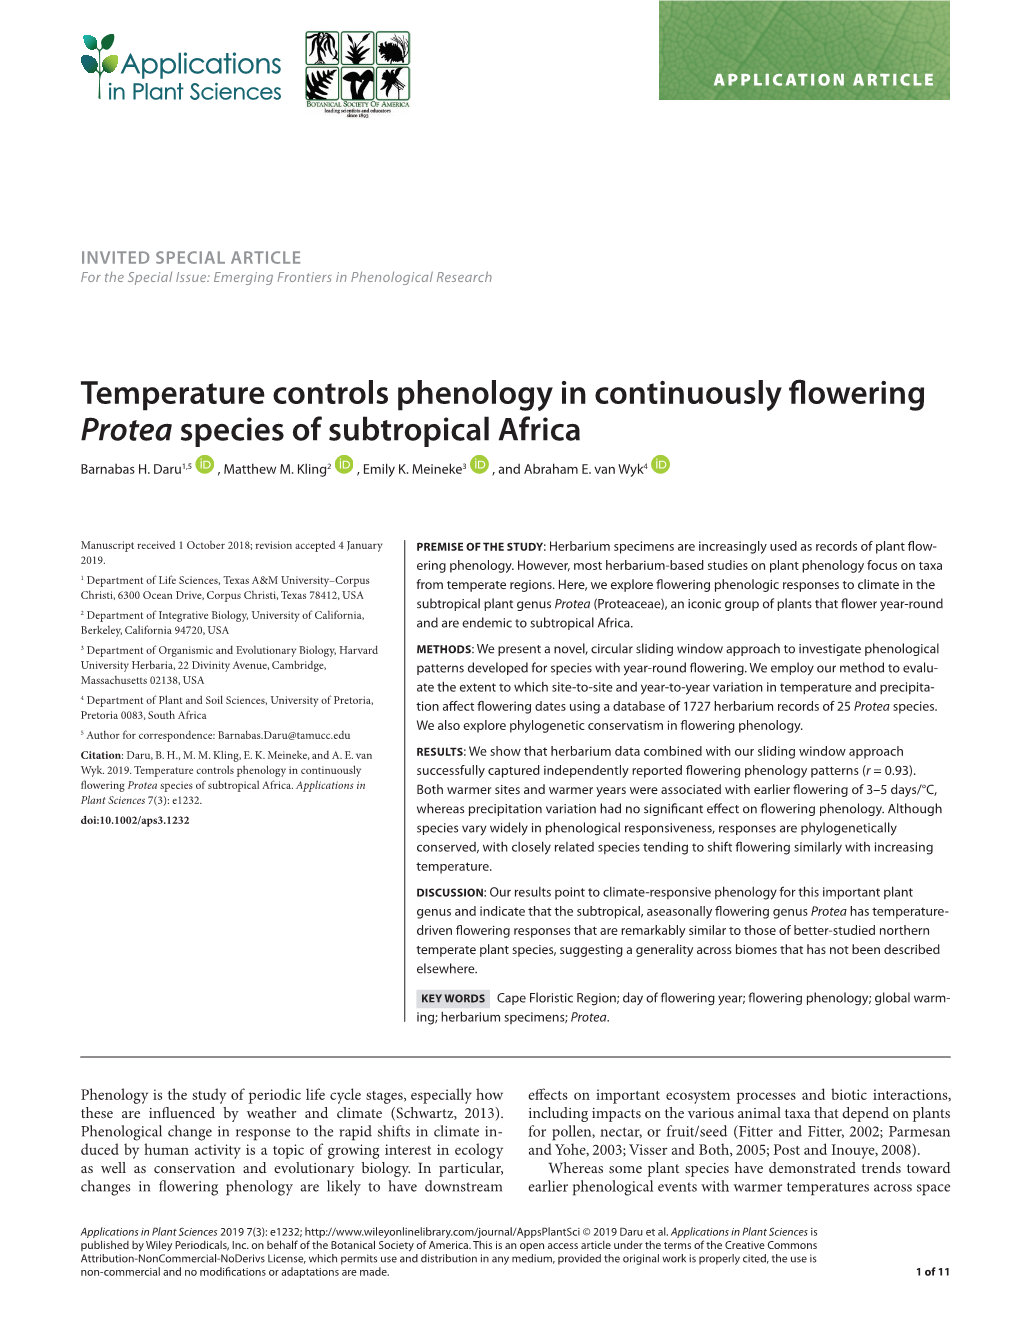 Temperature Controls Phenology in Continuously Flowering Protea Species of Subtropical Africa